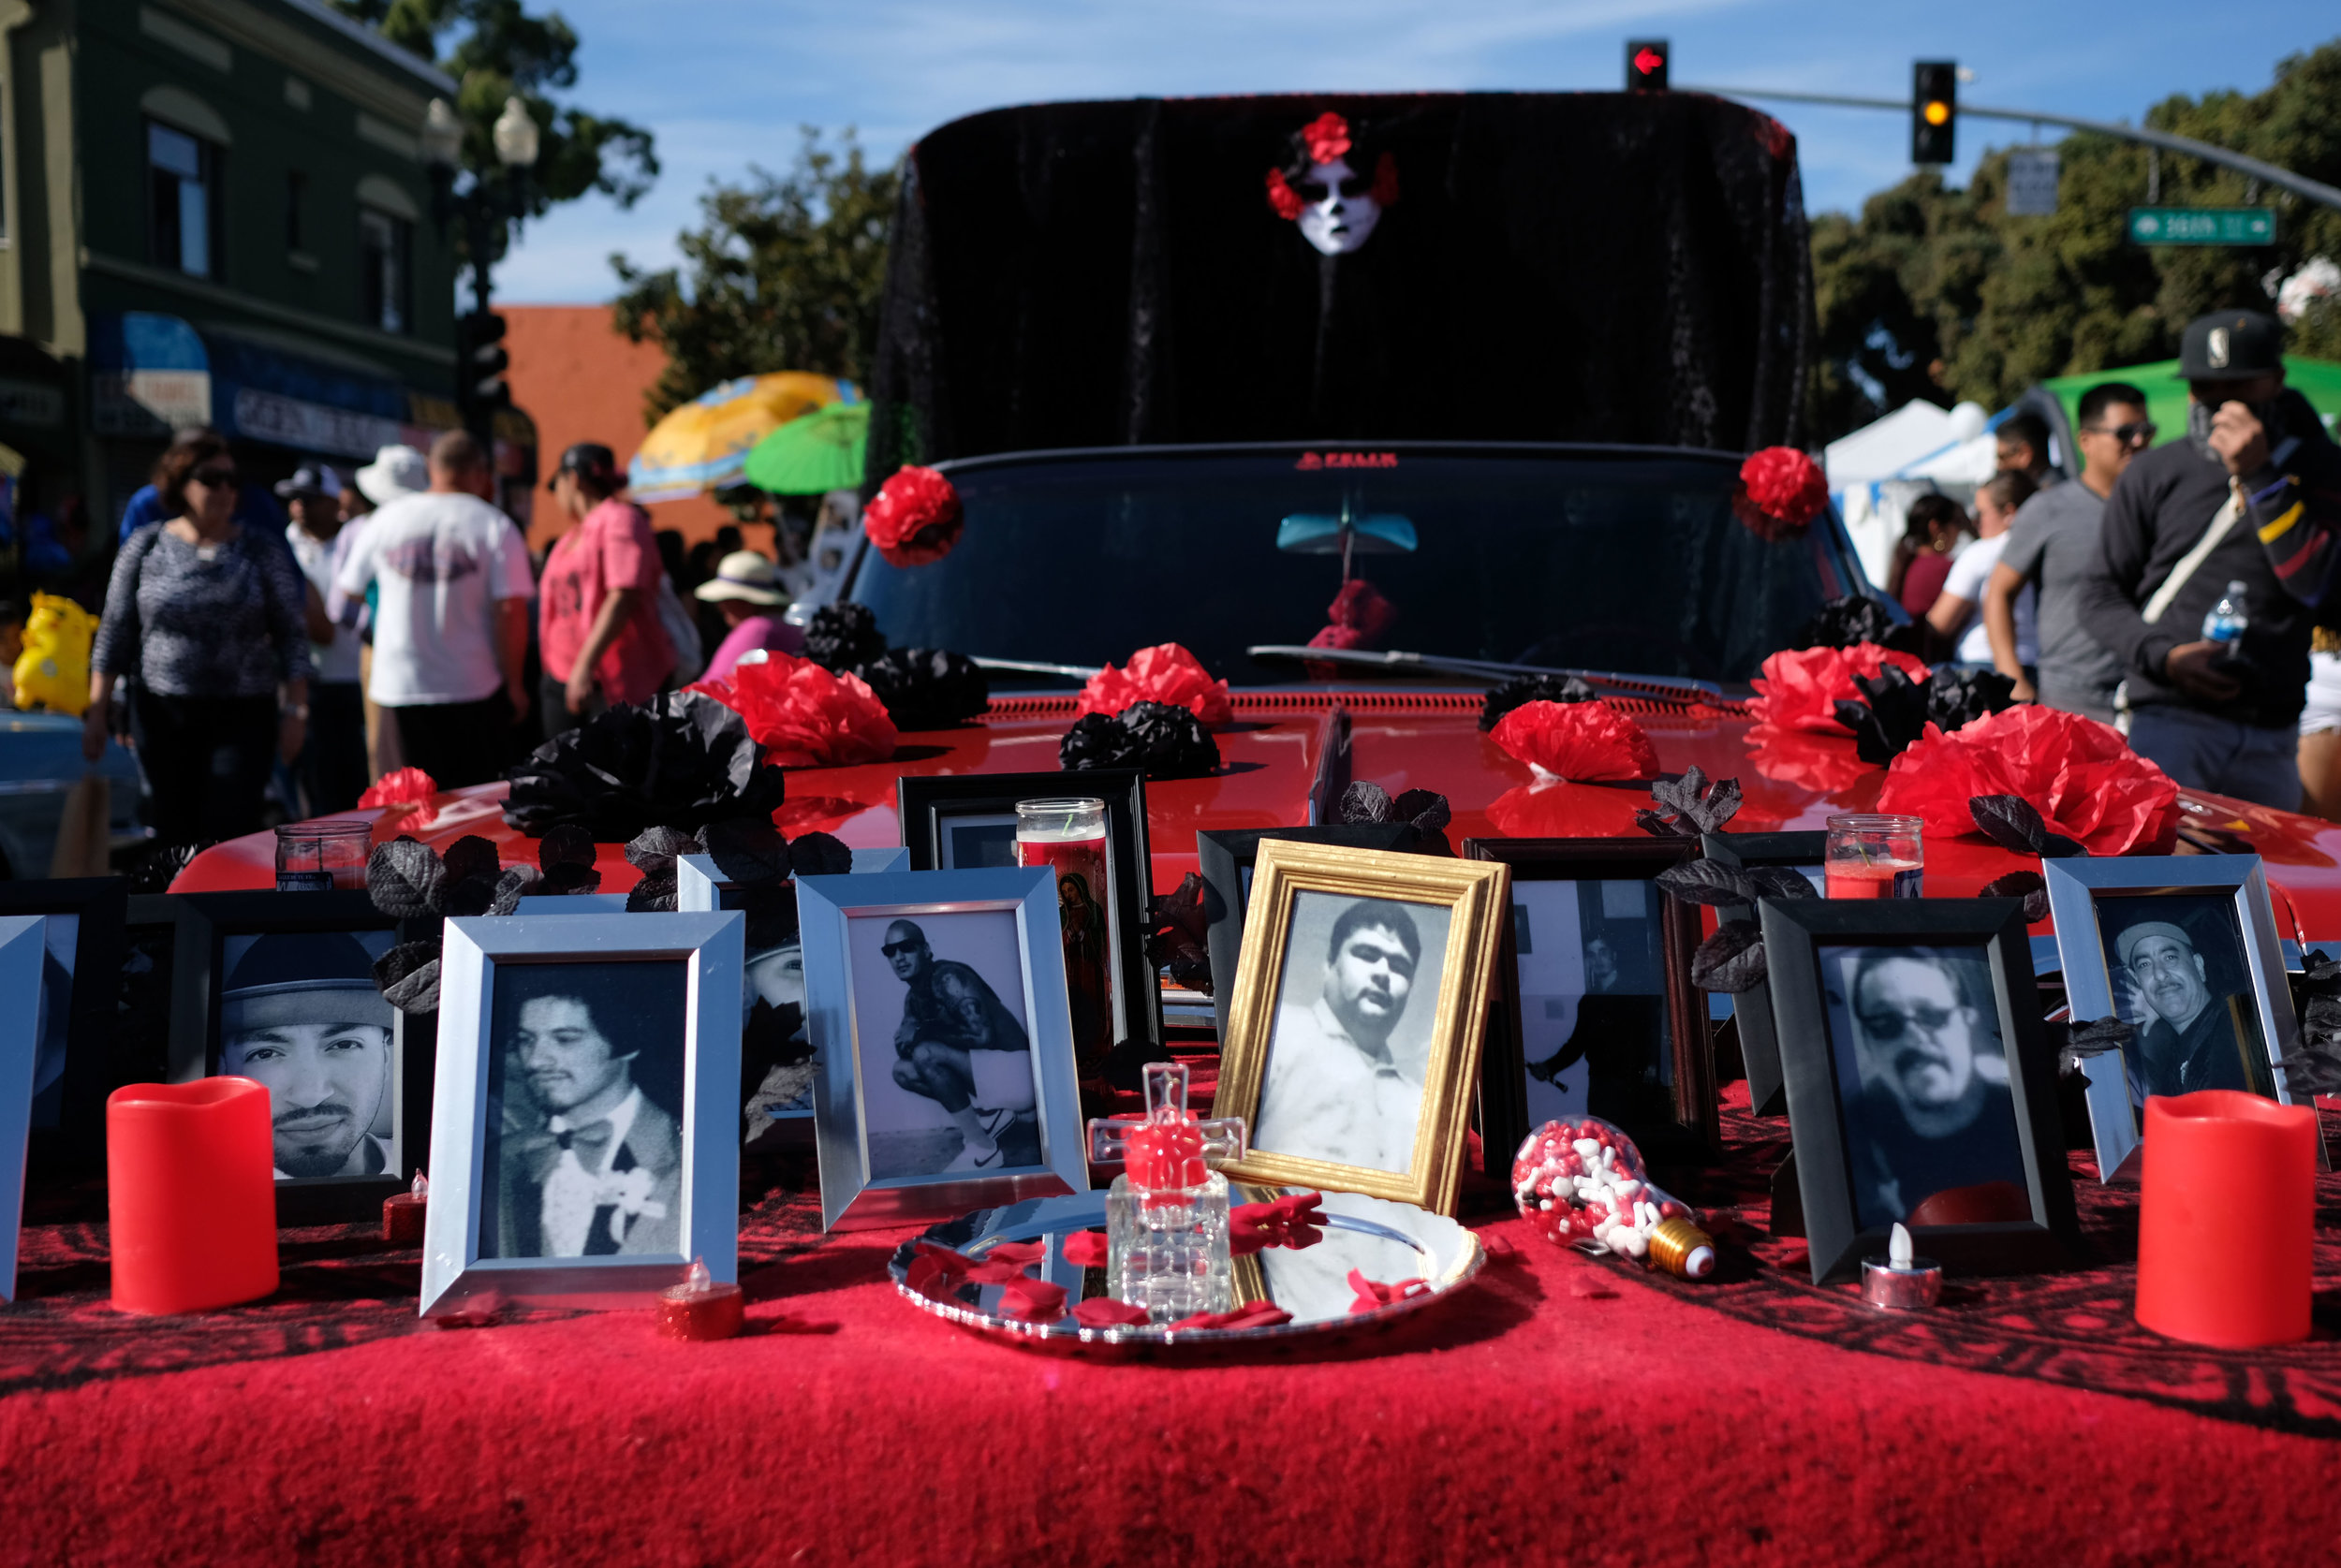  Framed portraits, as part of of a festival altar that includes a decorated lowrider, dedicated to local young men lost to violence.  International Boulevard, Oakland, CA.  